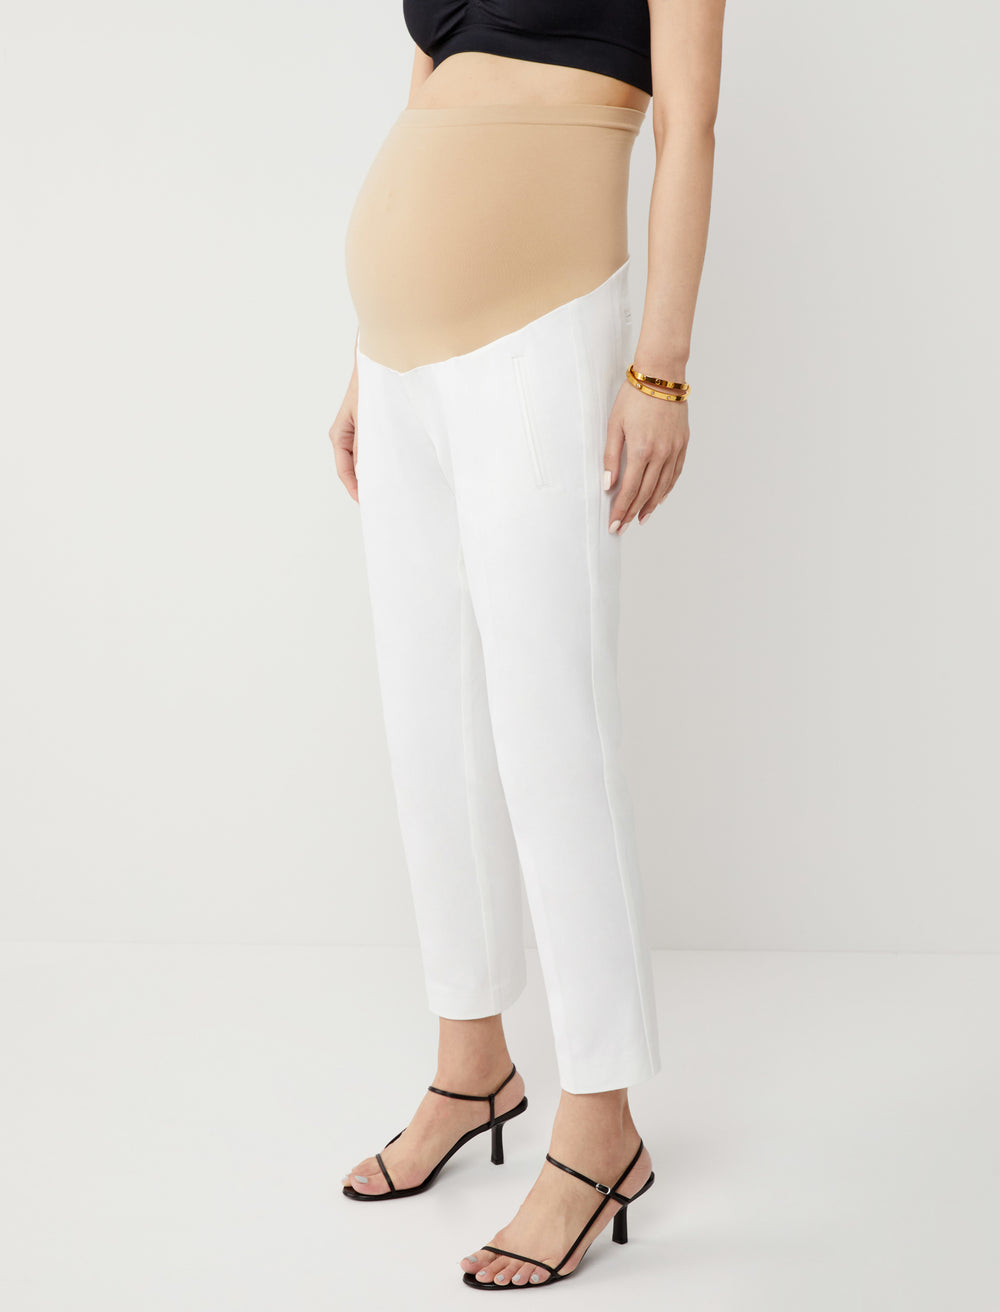 The Curie Secret Fit Belly Twill Slim Ankle Maternity Pant - A Pea